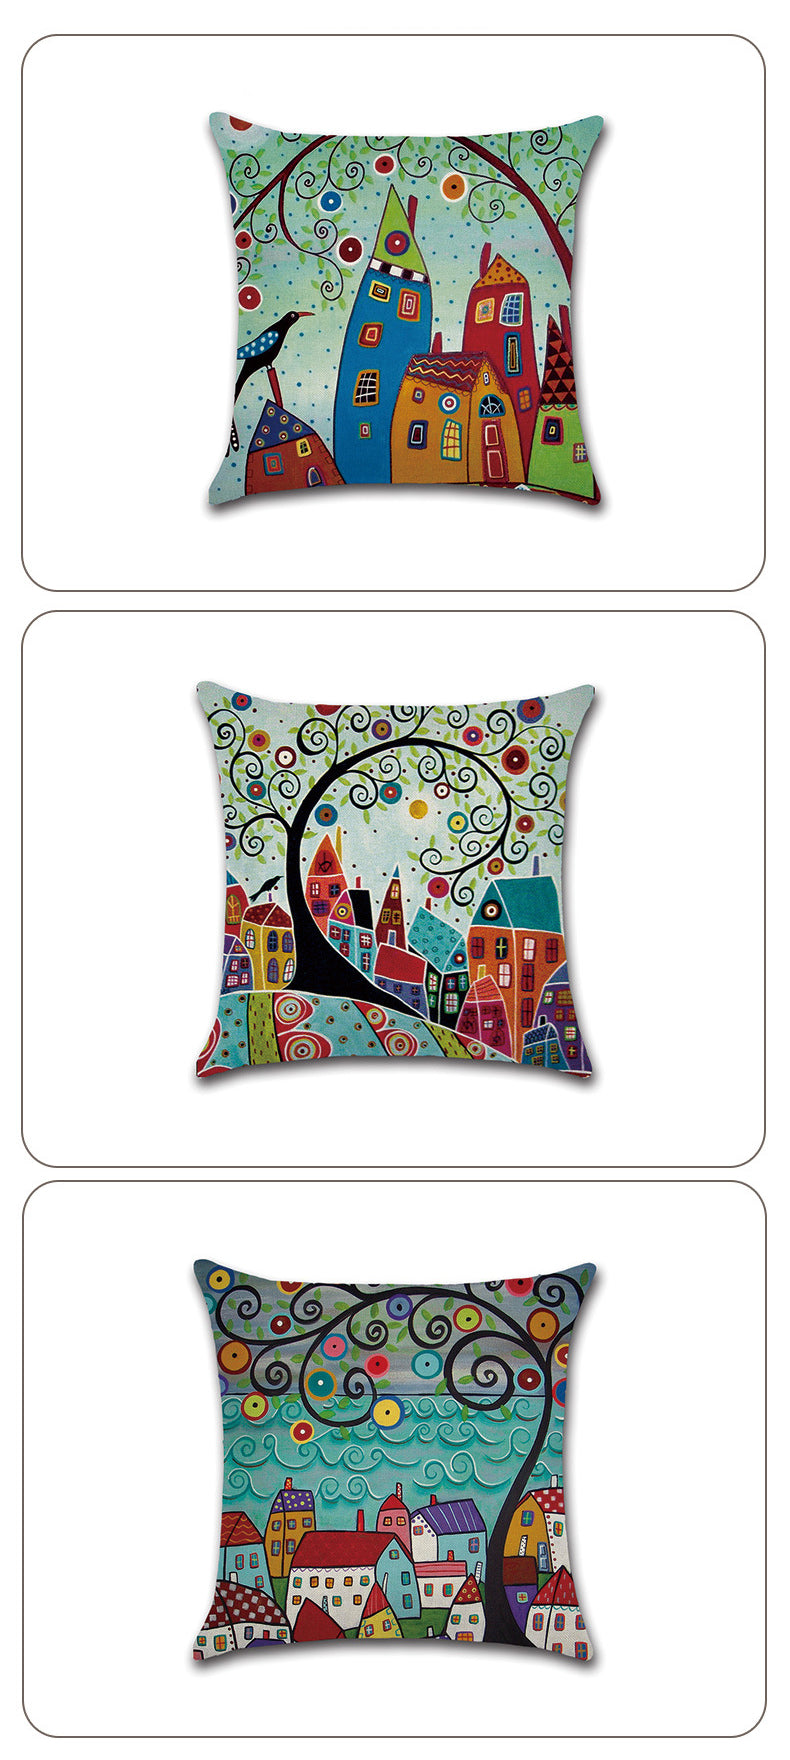 Colorful Nordic Style Abstract Cities 45x45cm Cushion Cover Hand Painted Decorative Pillow Cushion Cases For Living Room Home Decor